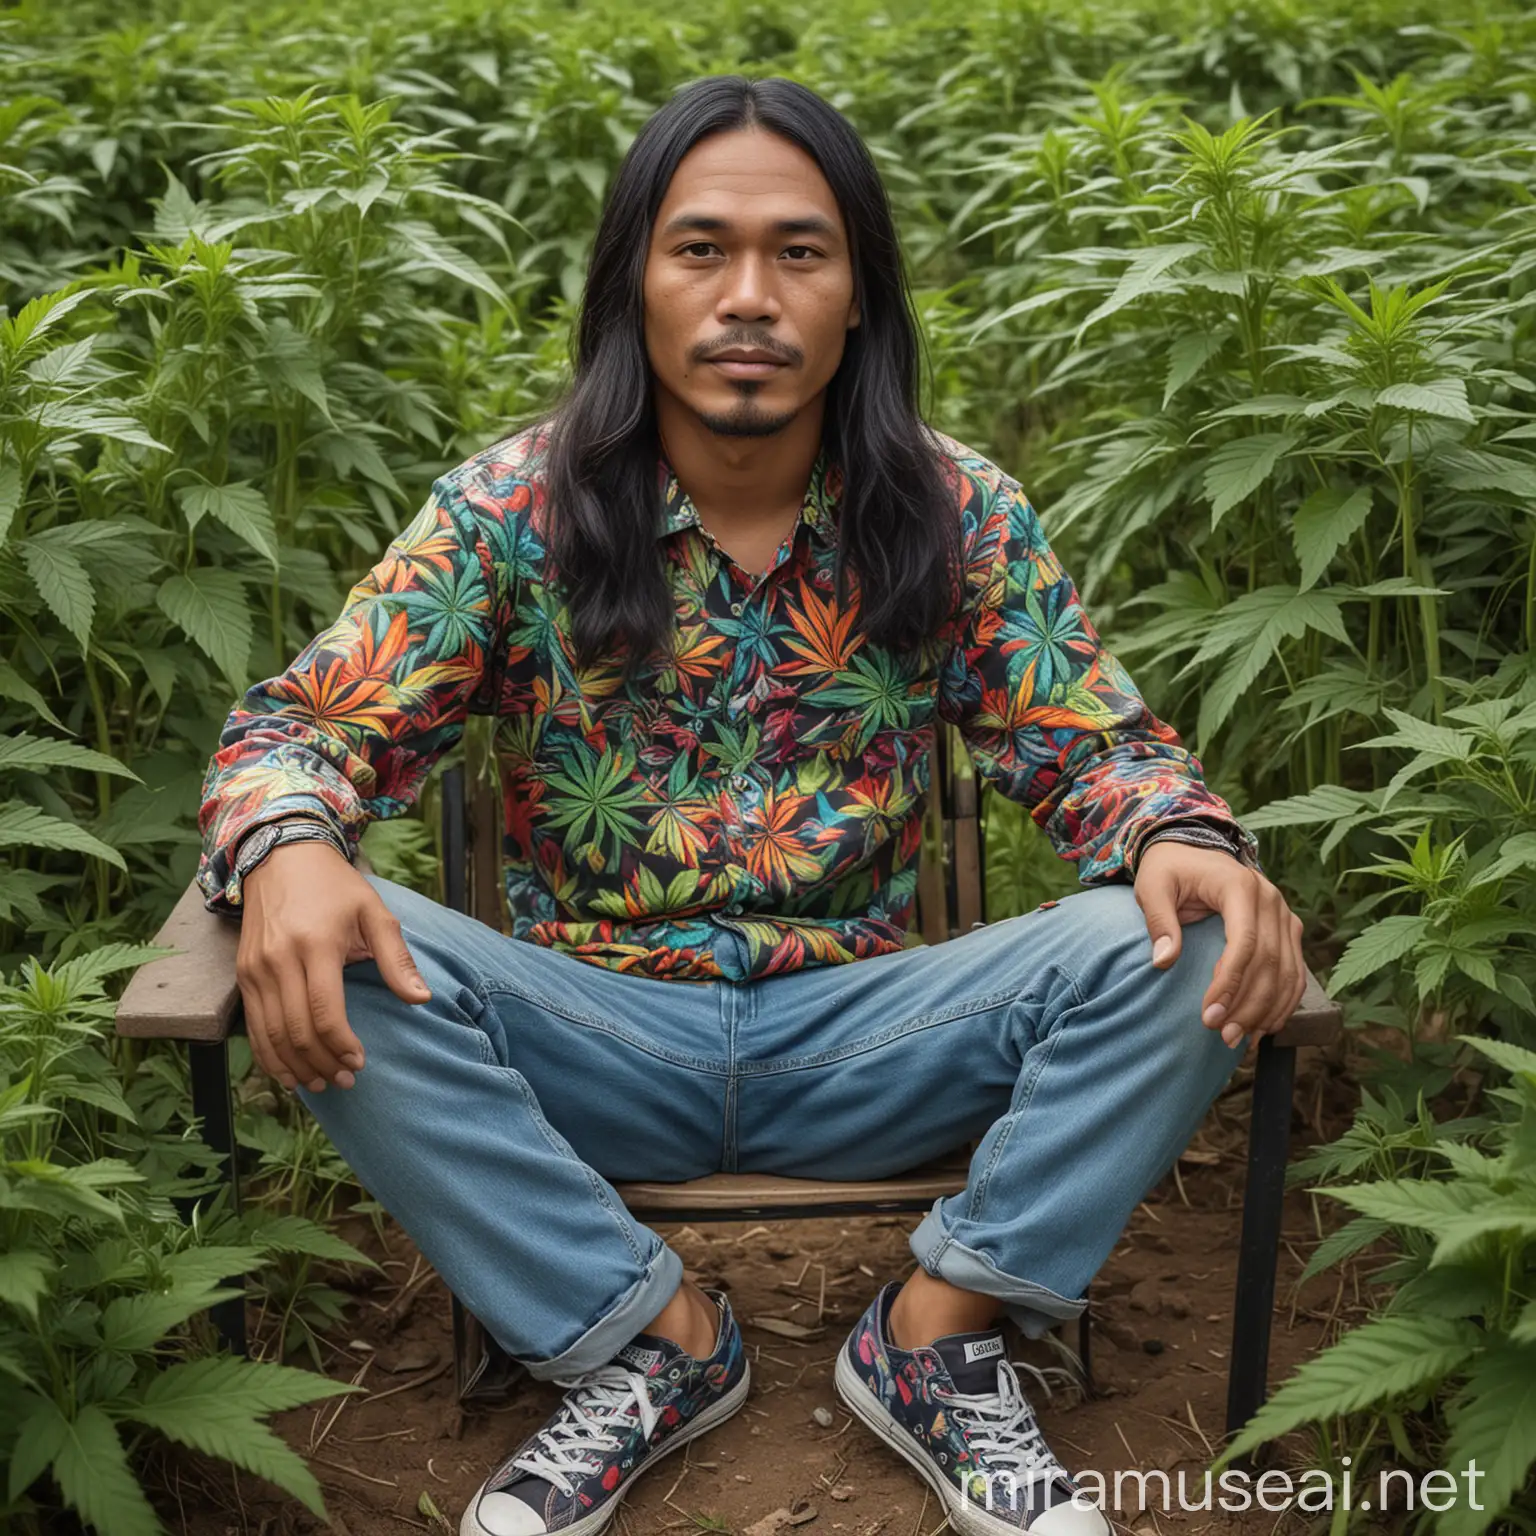 Indonesian Man Sitting in Marijuana Field with Psychedelic Attire